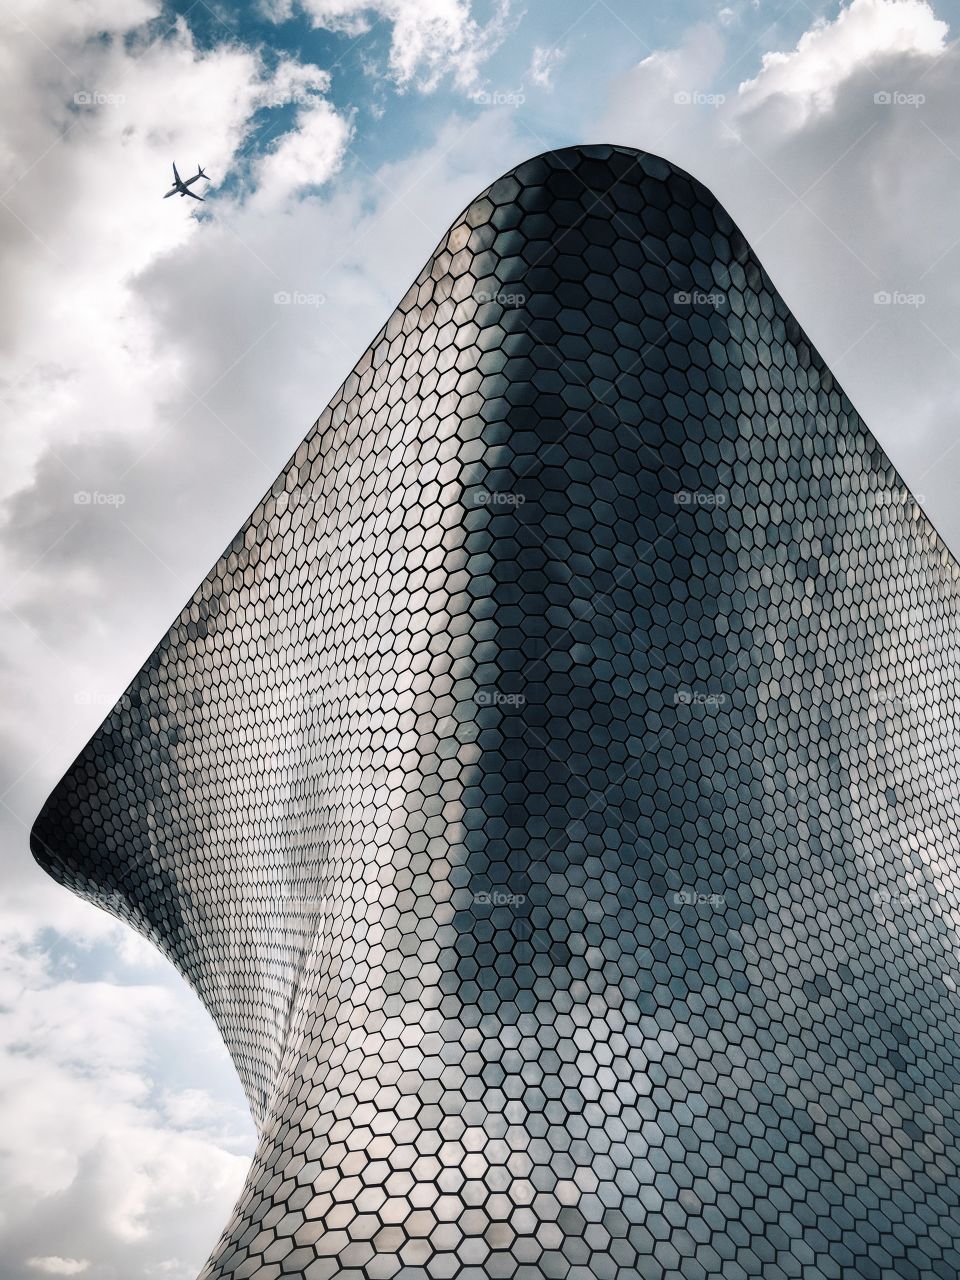 Soumaya museum, one of the most interesting buildings in Mexico City